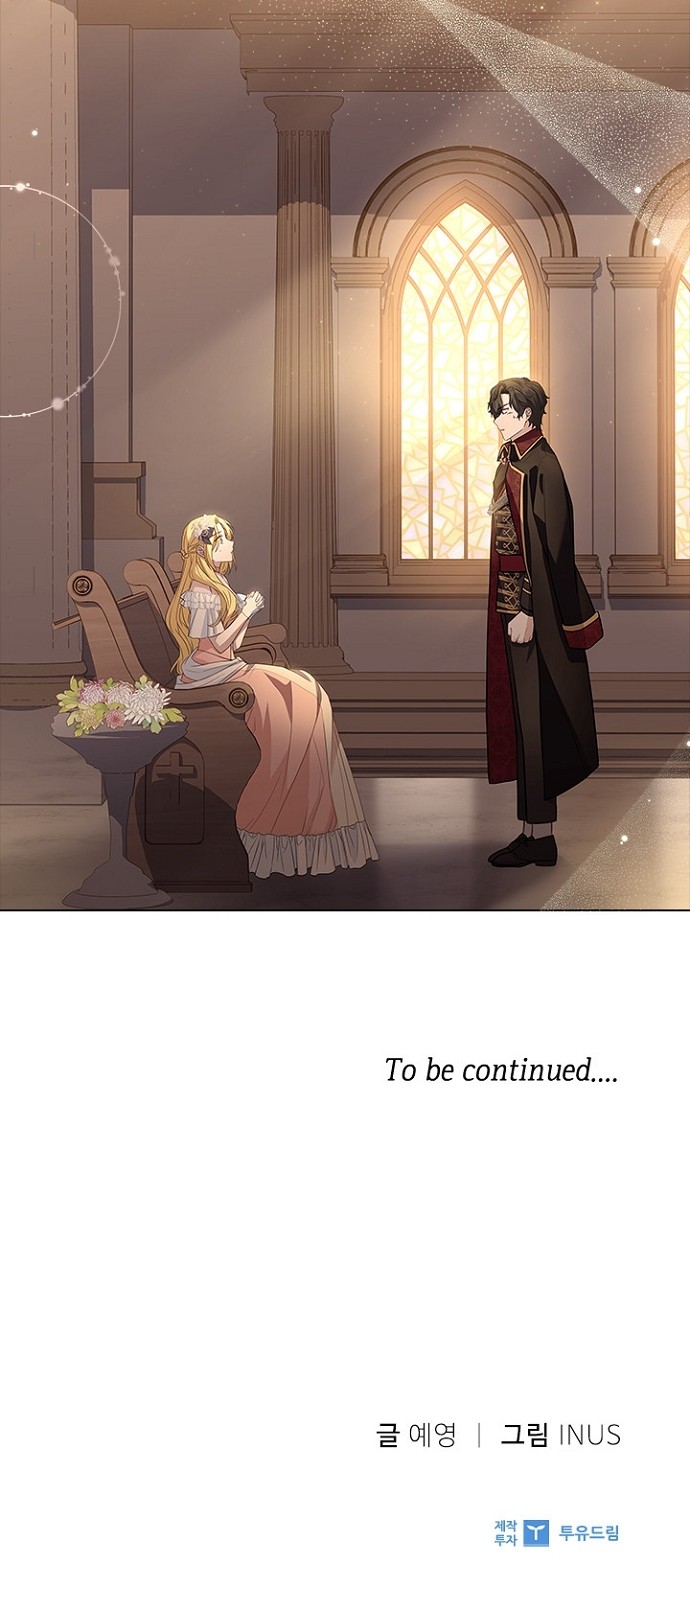 His Majesty's Proposal (A Night With the Emperor) - Chapter 61 - Page 59